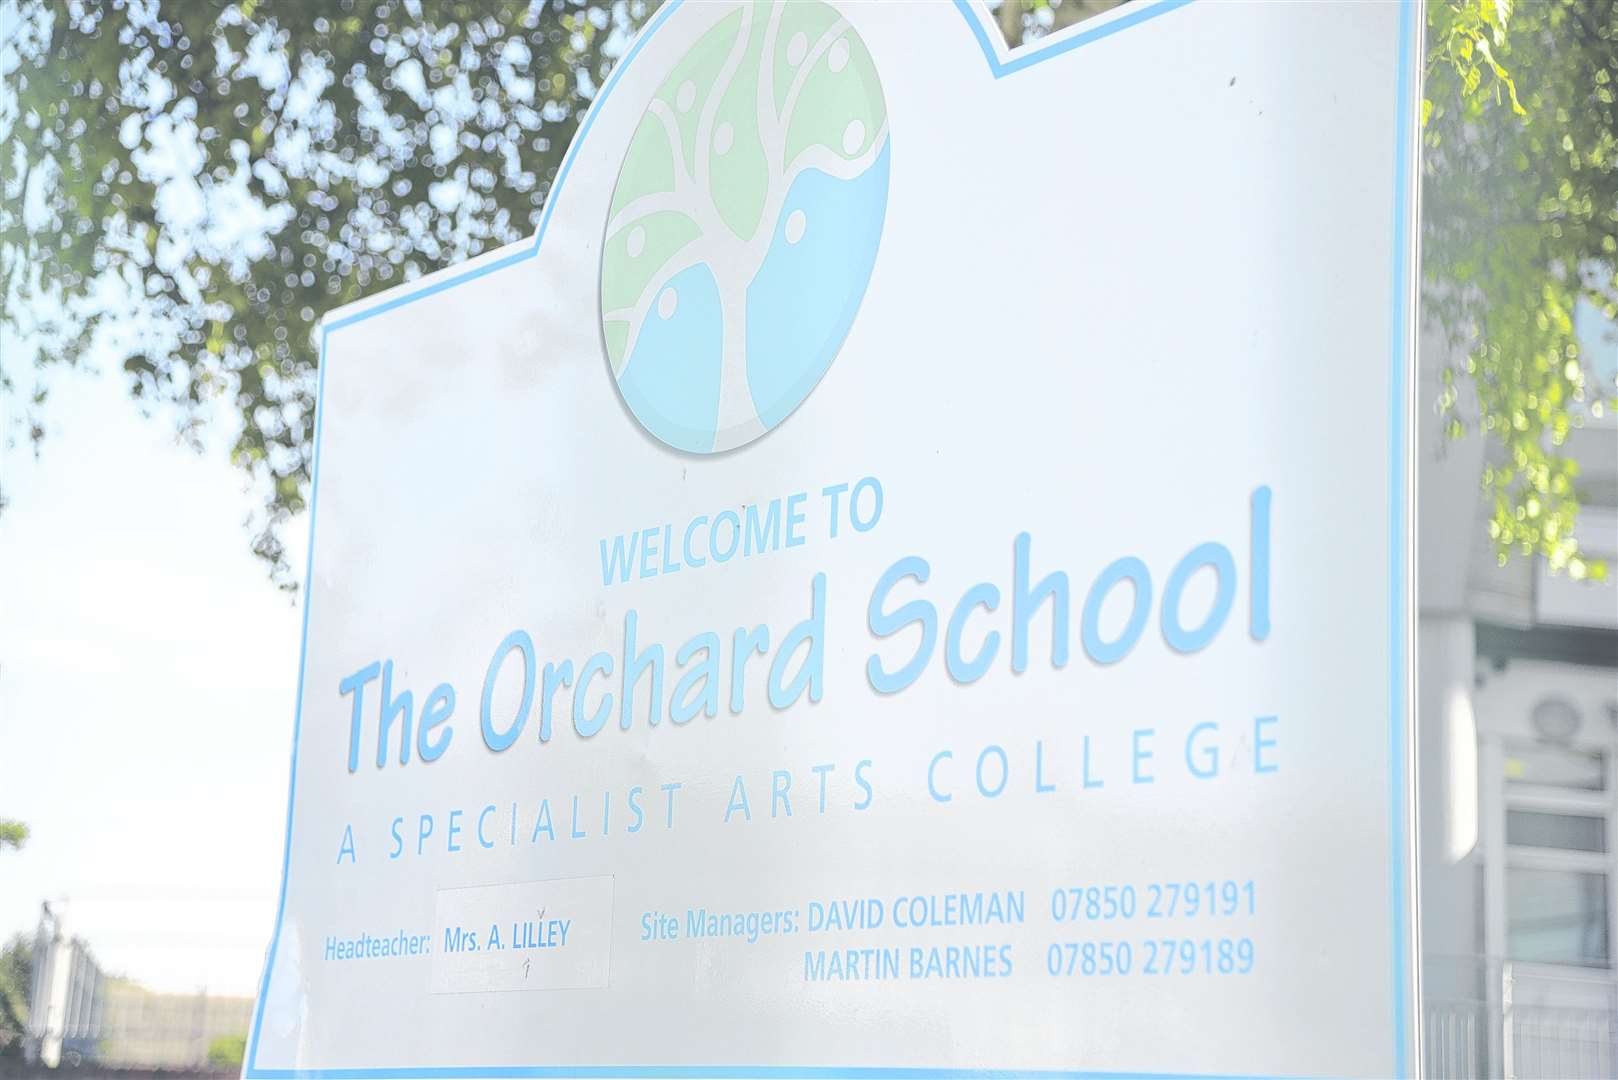 The Orchard School in Canterbury has closed for two weeks